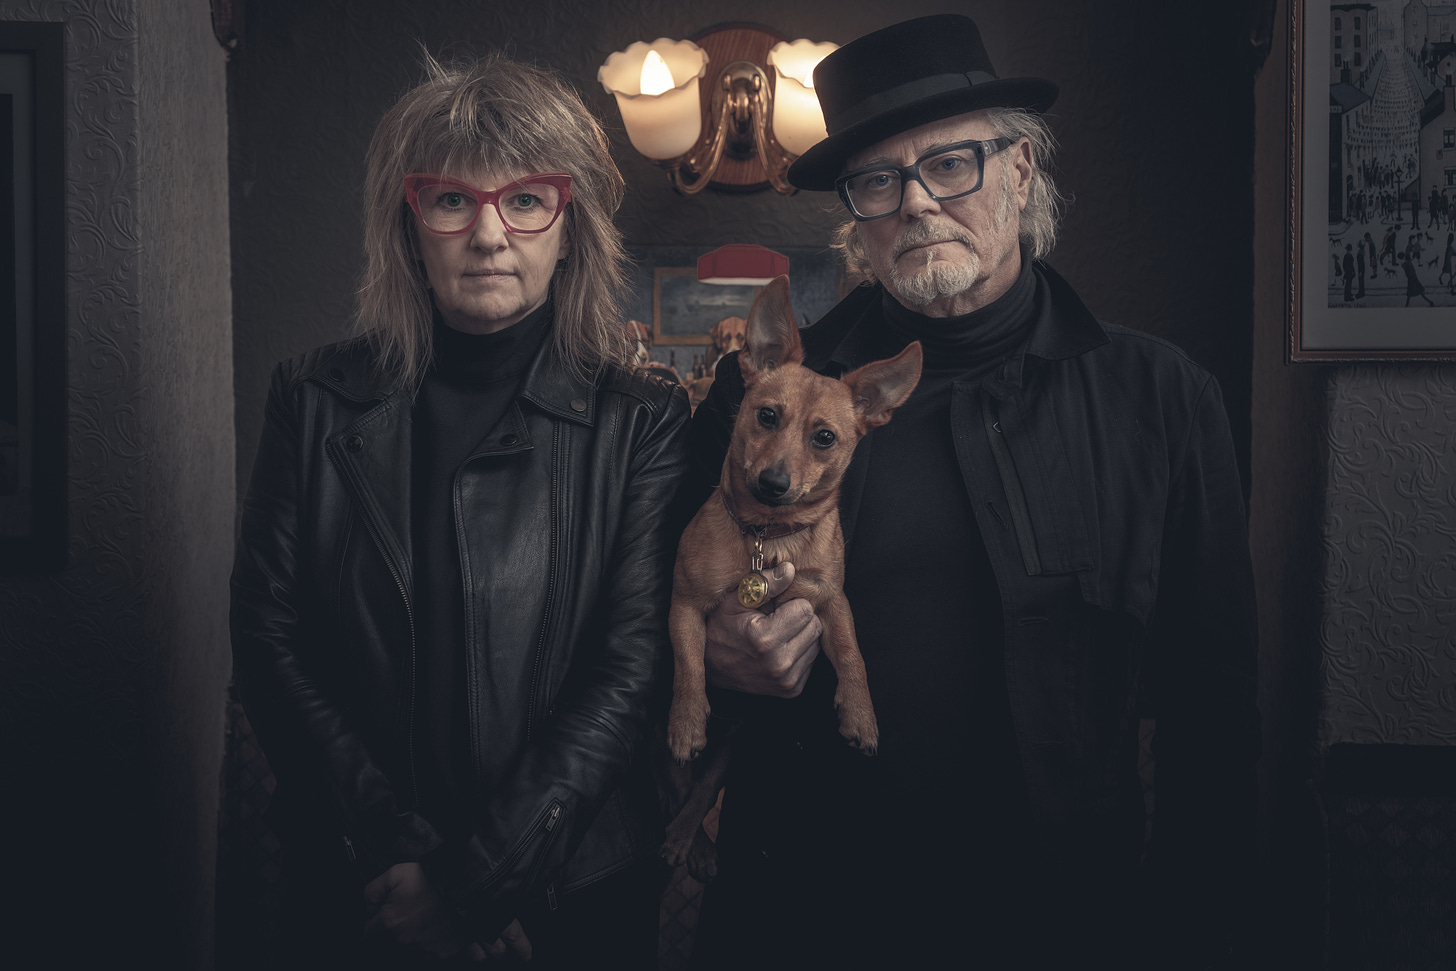 Suzy Starlite and Simon Campbell pictured with a random dog against a old school English pub background